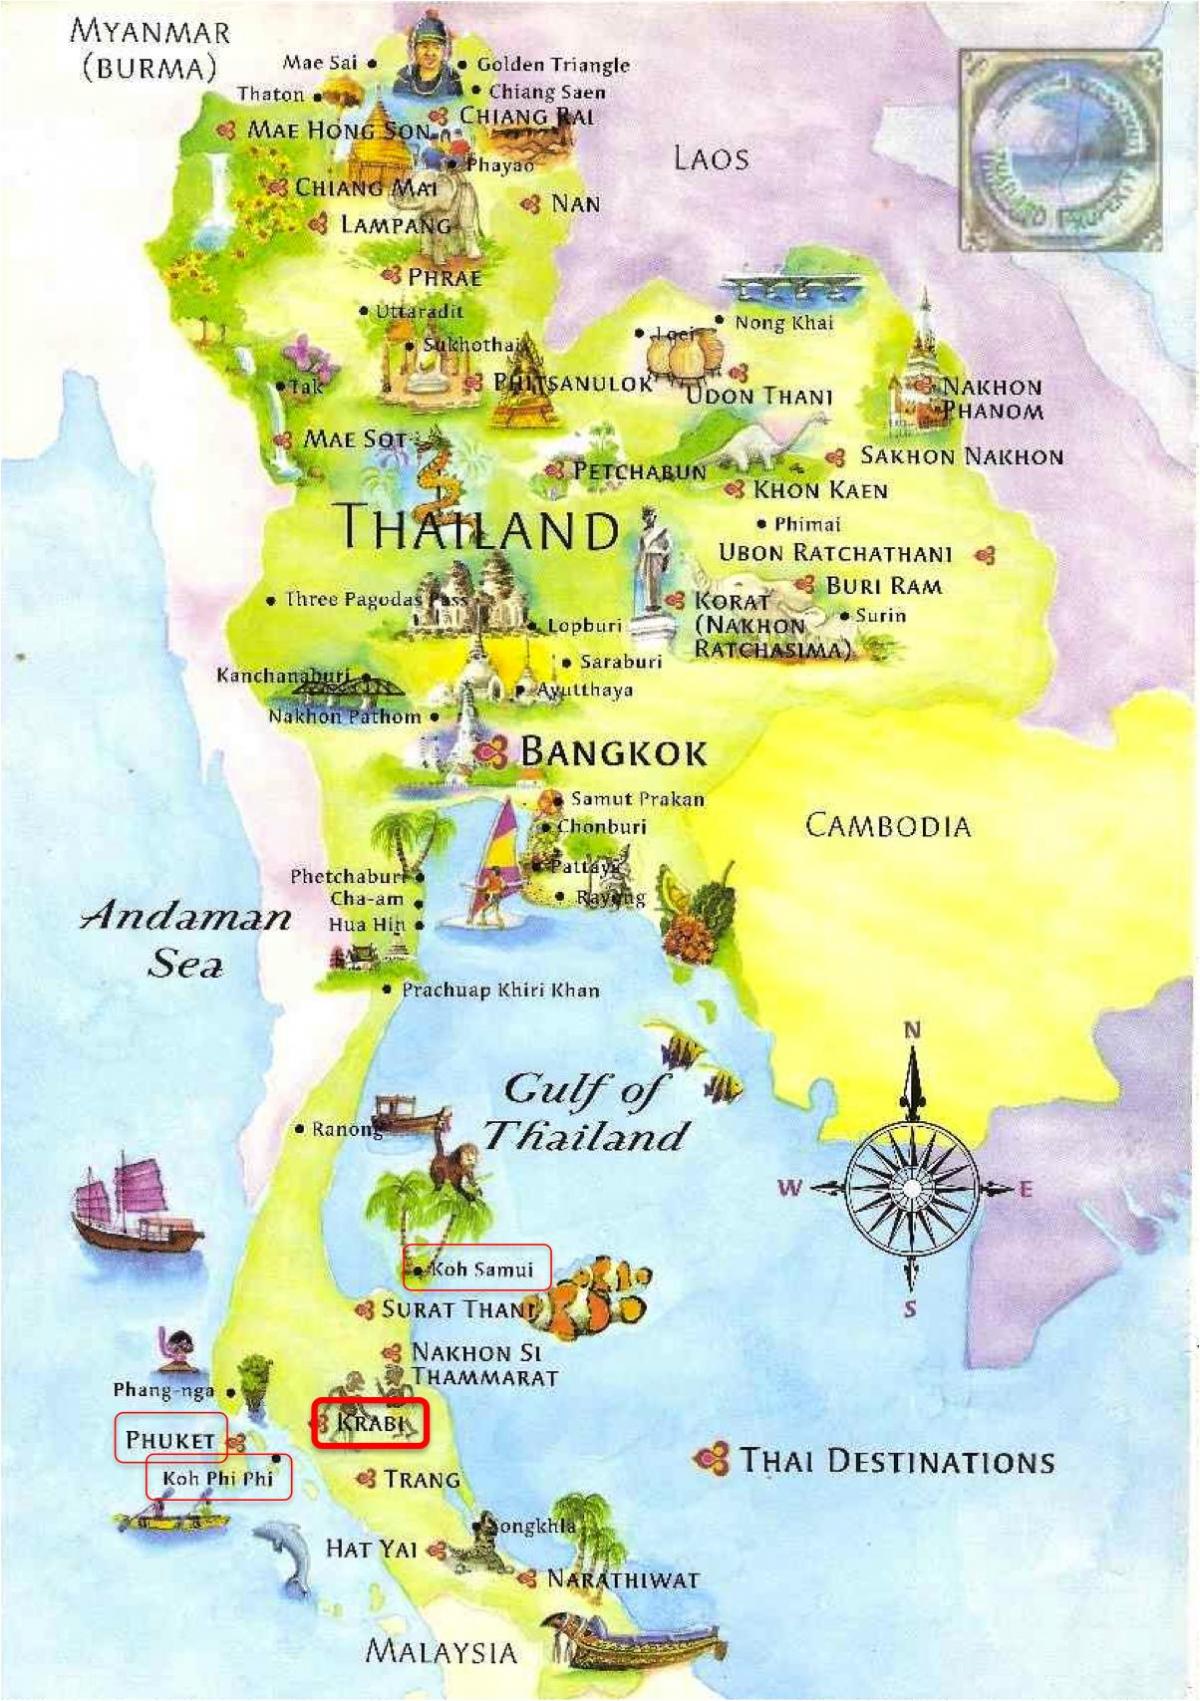 Thailand tourist attractions map